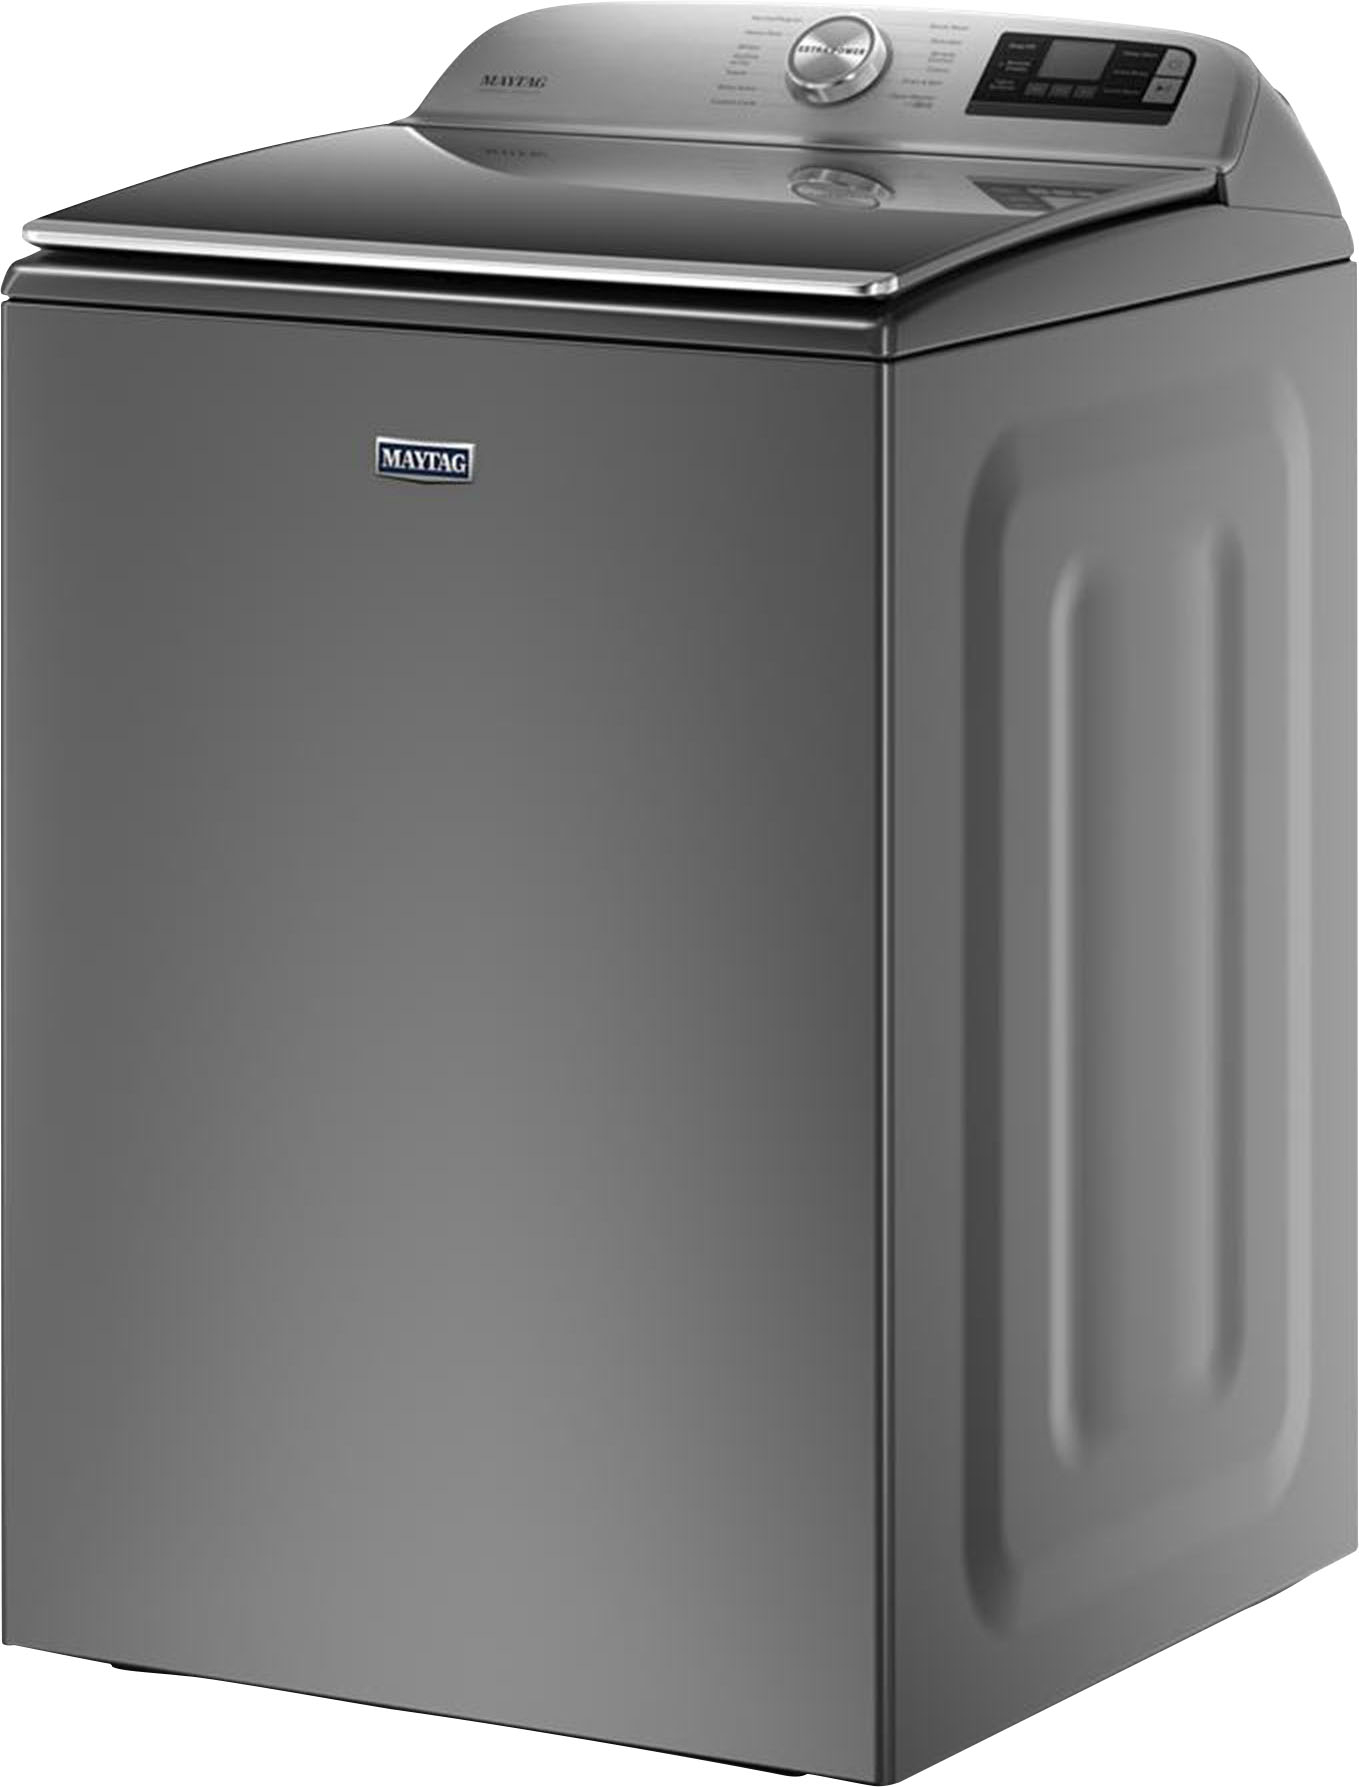 Left View: Maytag - 5.2 Cu. Ft. High Efficiency Smart Top Load Washer with Extra Power Button - Metallic slate